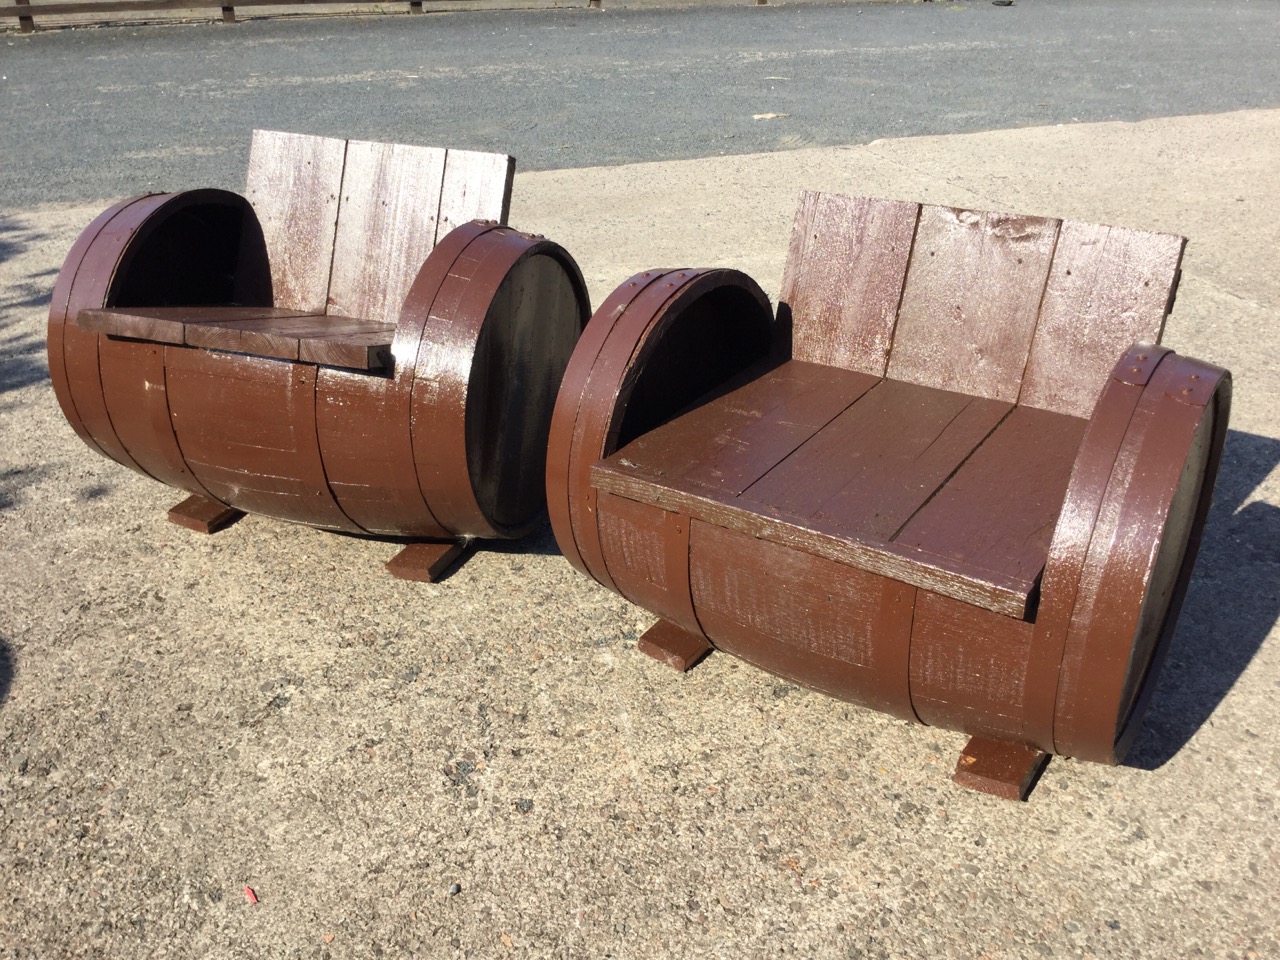 A pair of painted garden seats formed out of old barrels, with boarded backs and seats cut into